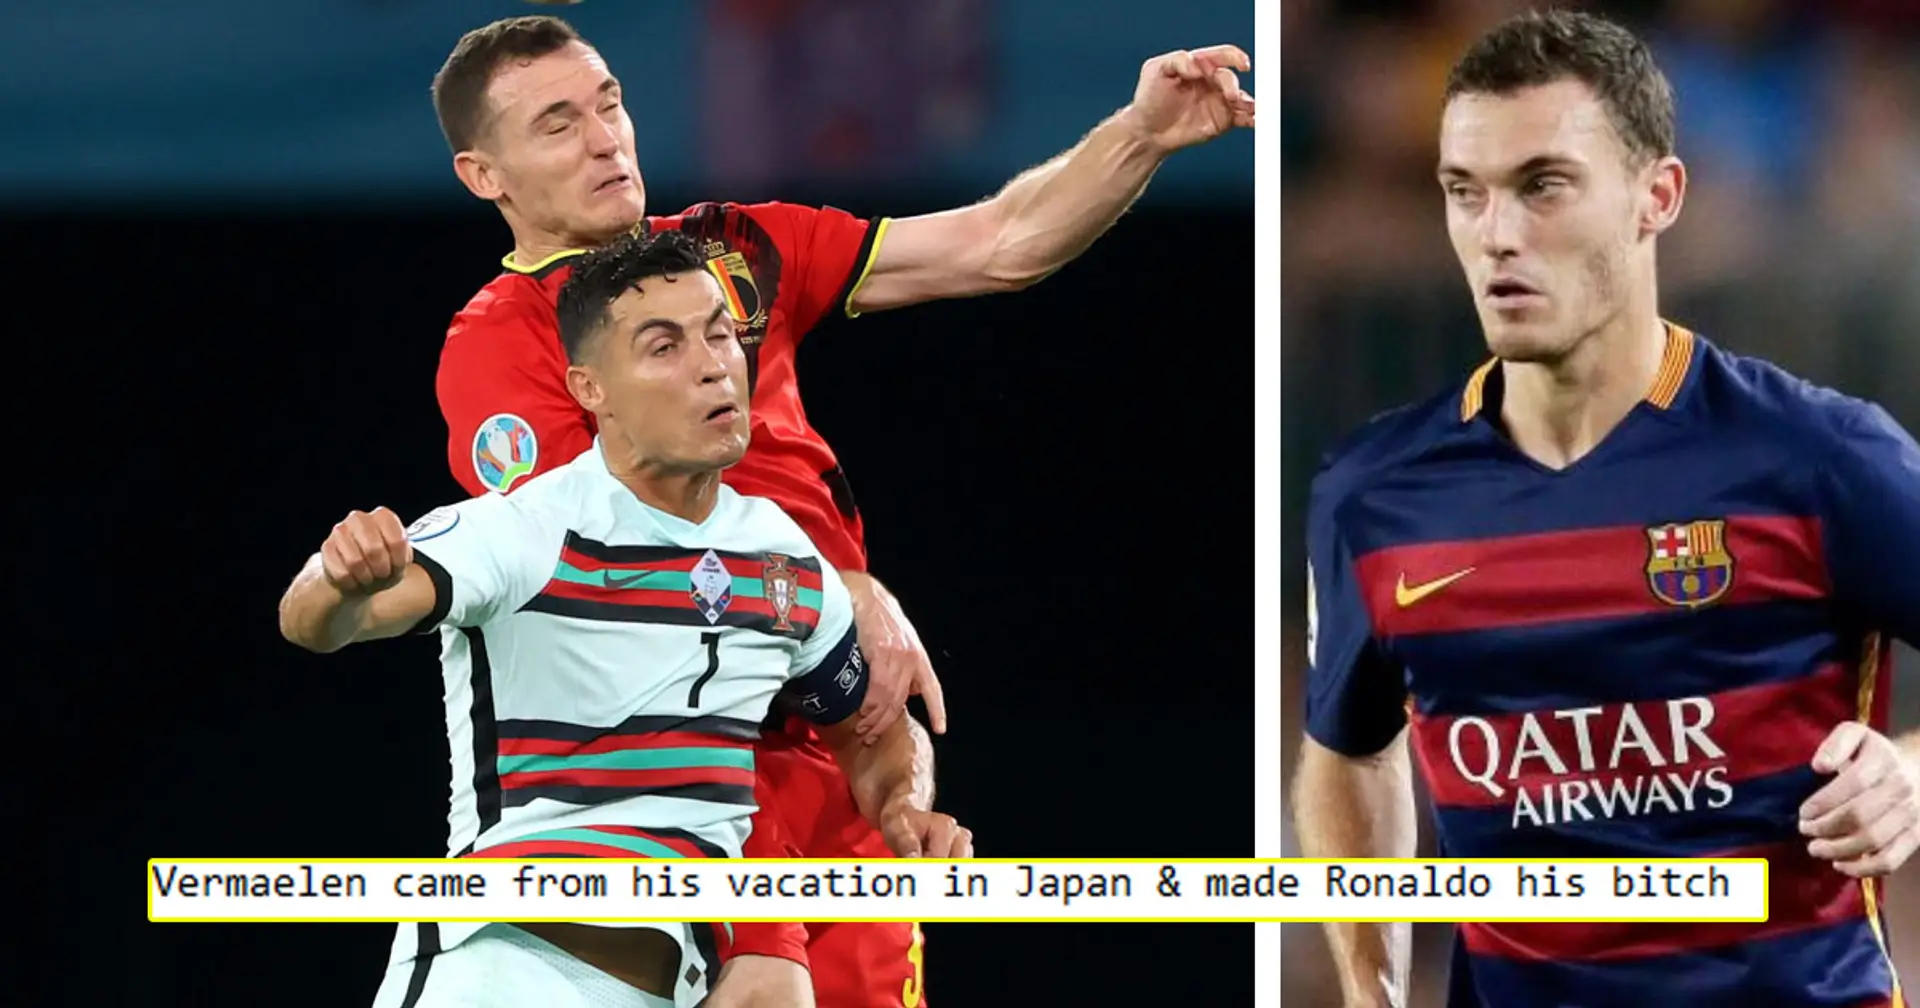 'Made Ronaldo his b****': some fans hail unexpected hero Vermaelen as ex-Blaugrana helps eliminate Portugal from Euros